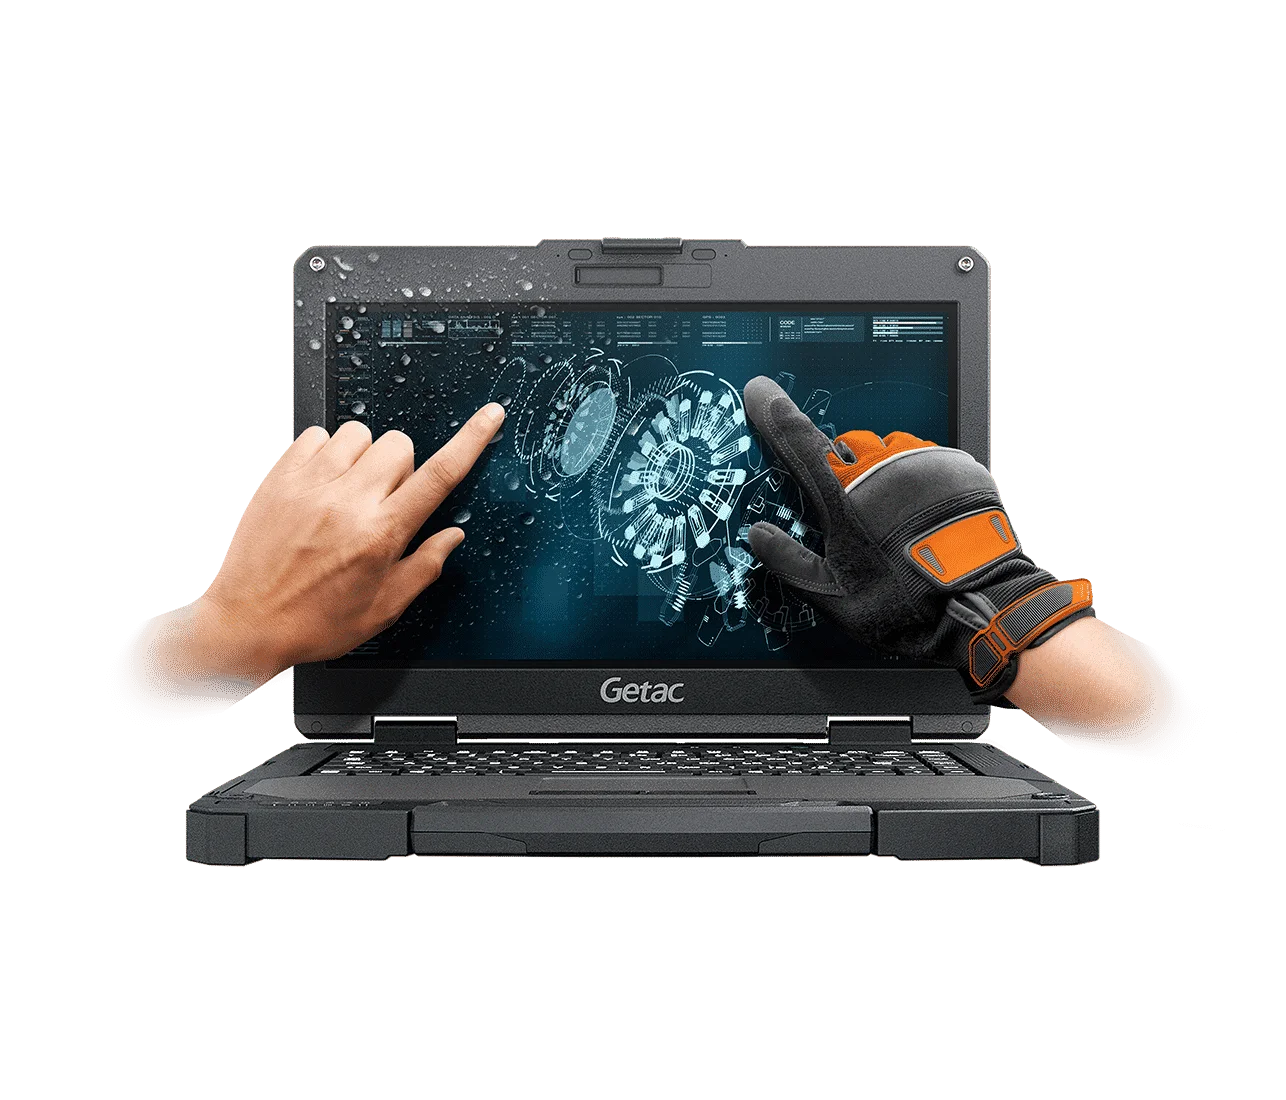 NEW!! Getac B360 - Powerful 13.3" Fully rugged Notebook for field service, 1400 nits, 10th generation Core processor